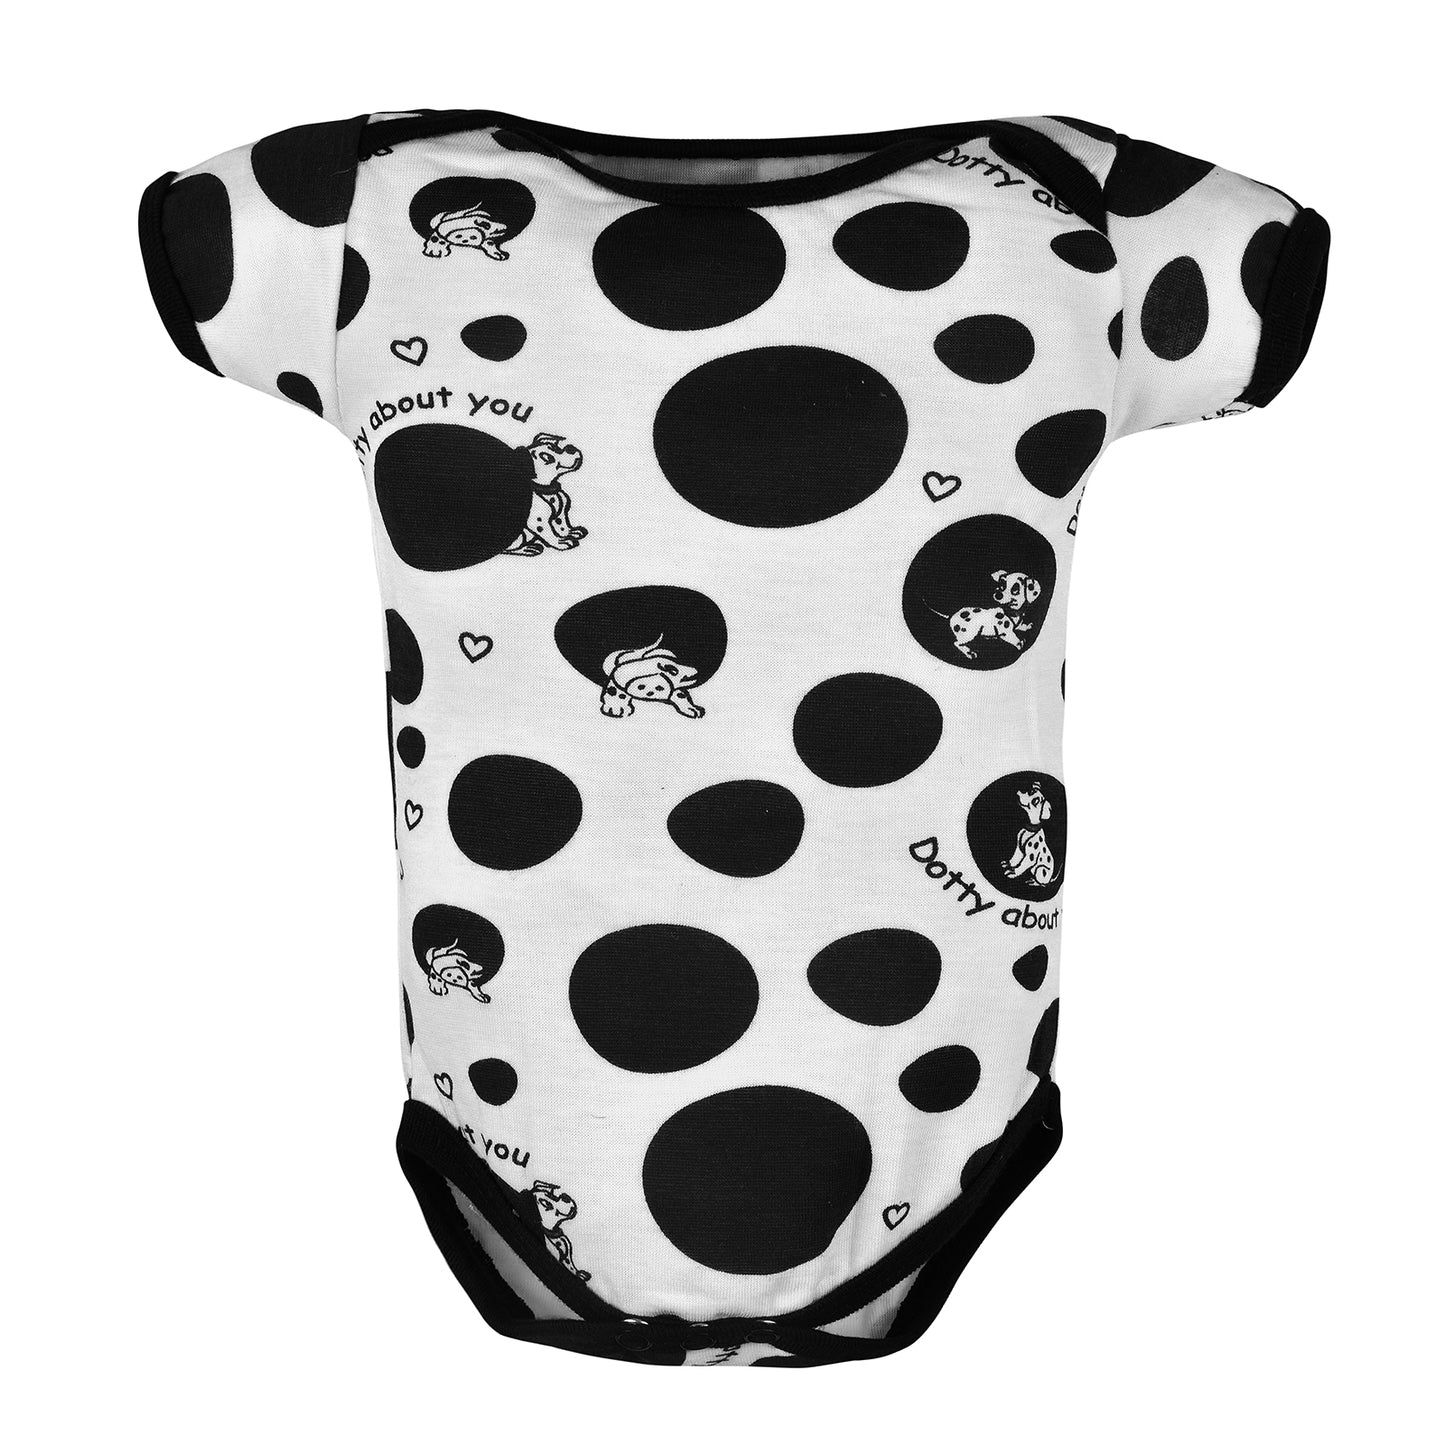 Bodice Half Sleeves Baby Romper Body Suits Jump Suit for Boys and Girls Set of 3 (Black)